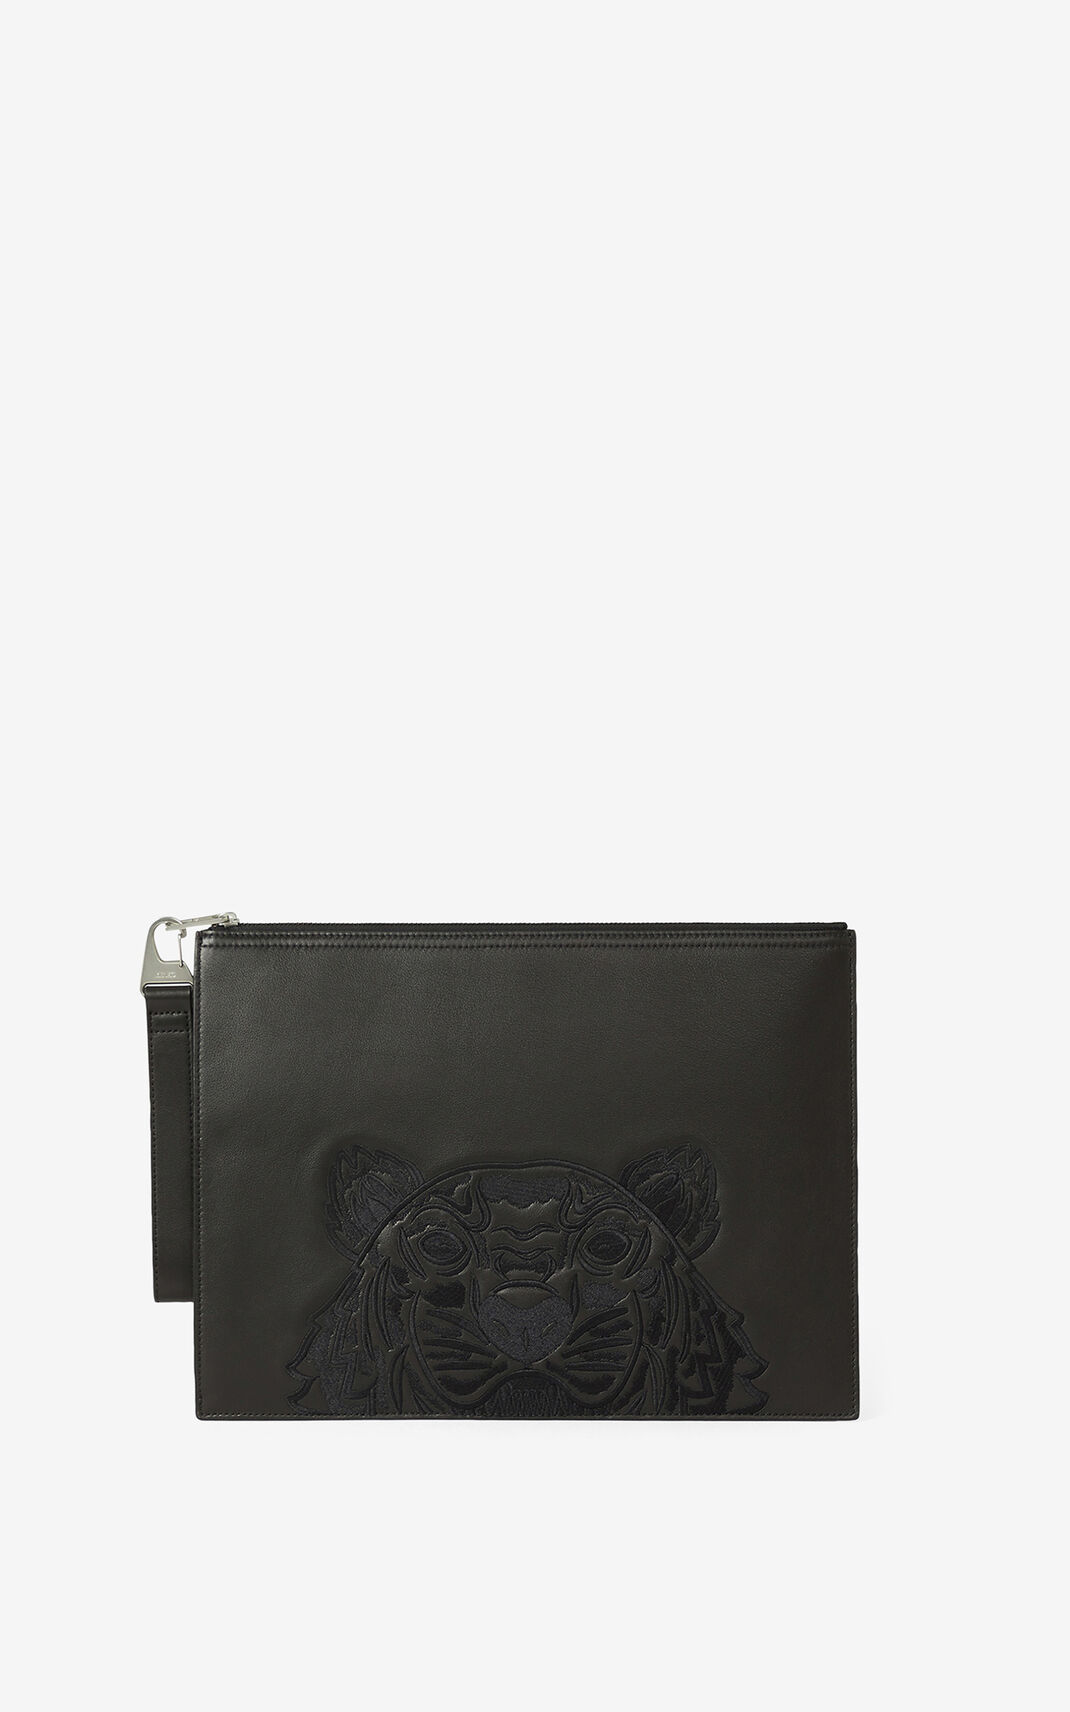 Kenzo Kampus Tiger large grained leather Clutch Black For Womens 1362KALEY